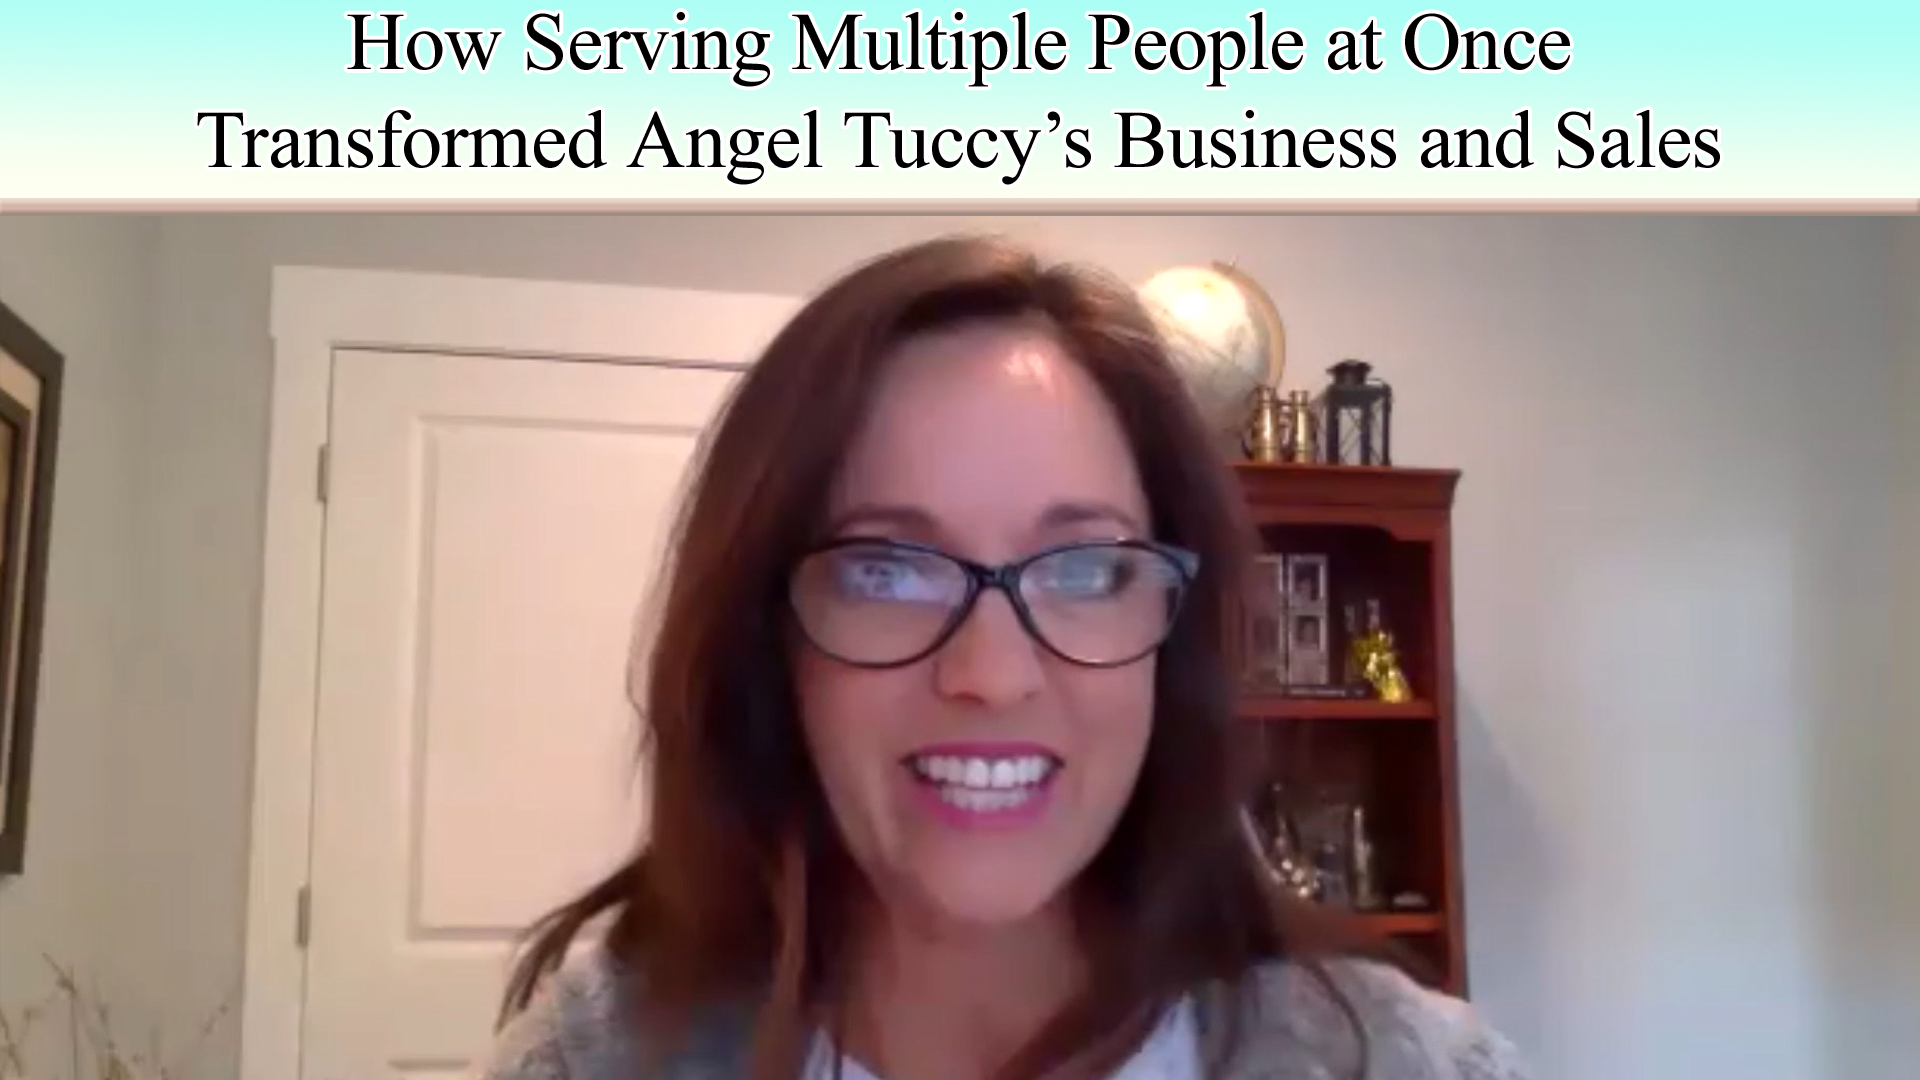 Interview with Angel Tuccy: How Serving Multiple People at Once Transformed Her Business and Sales